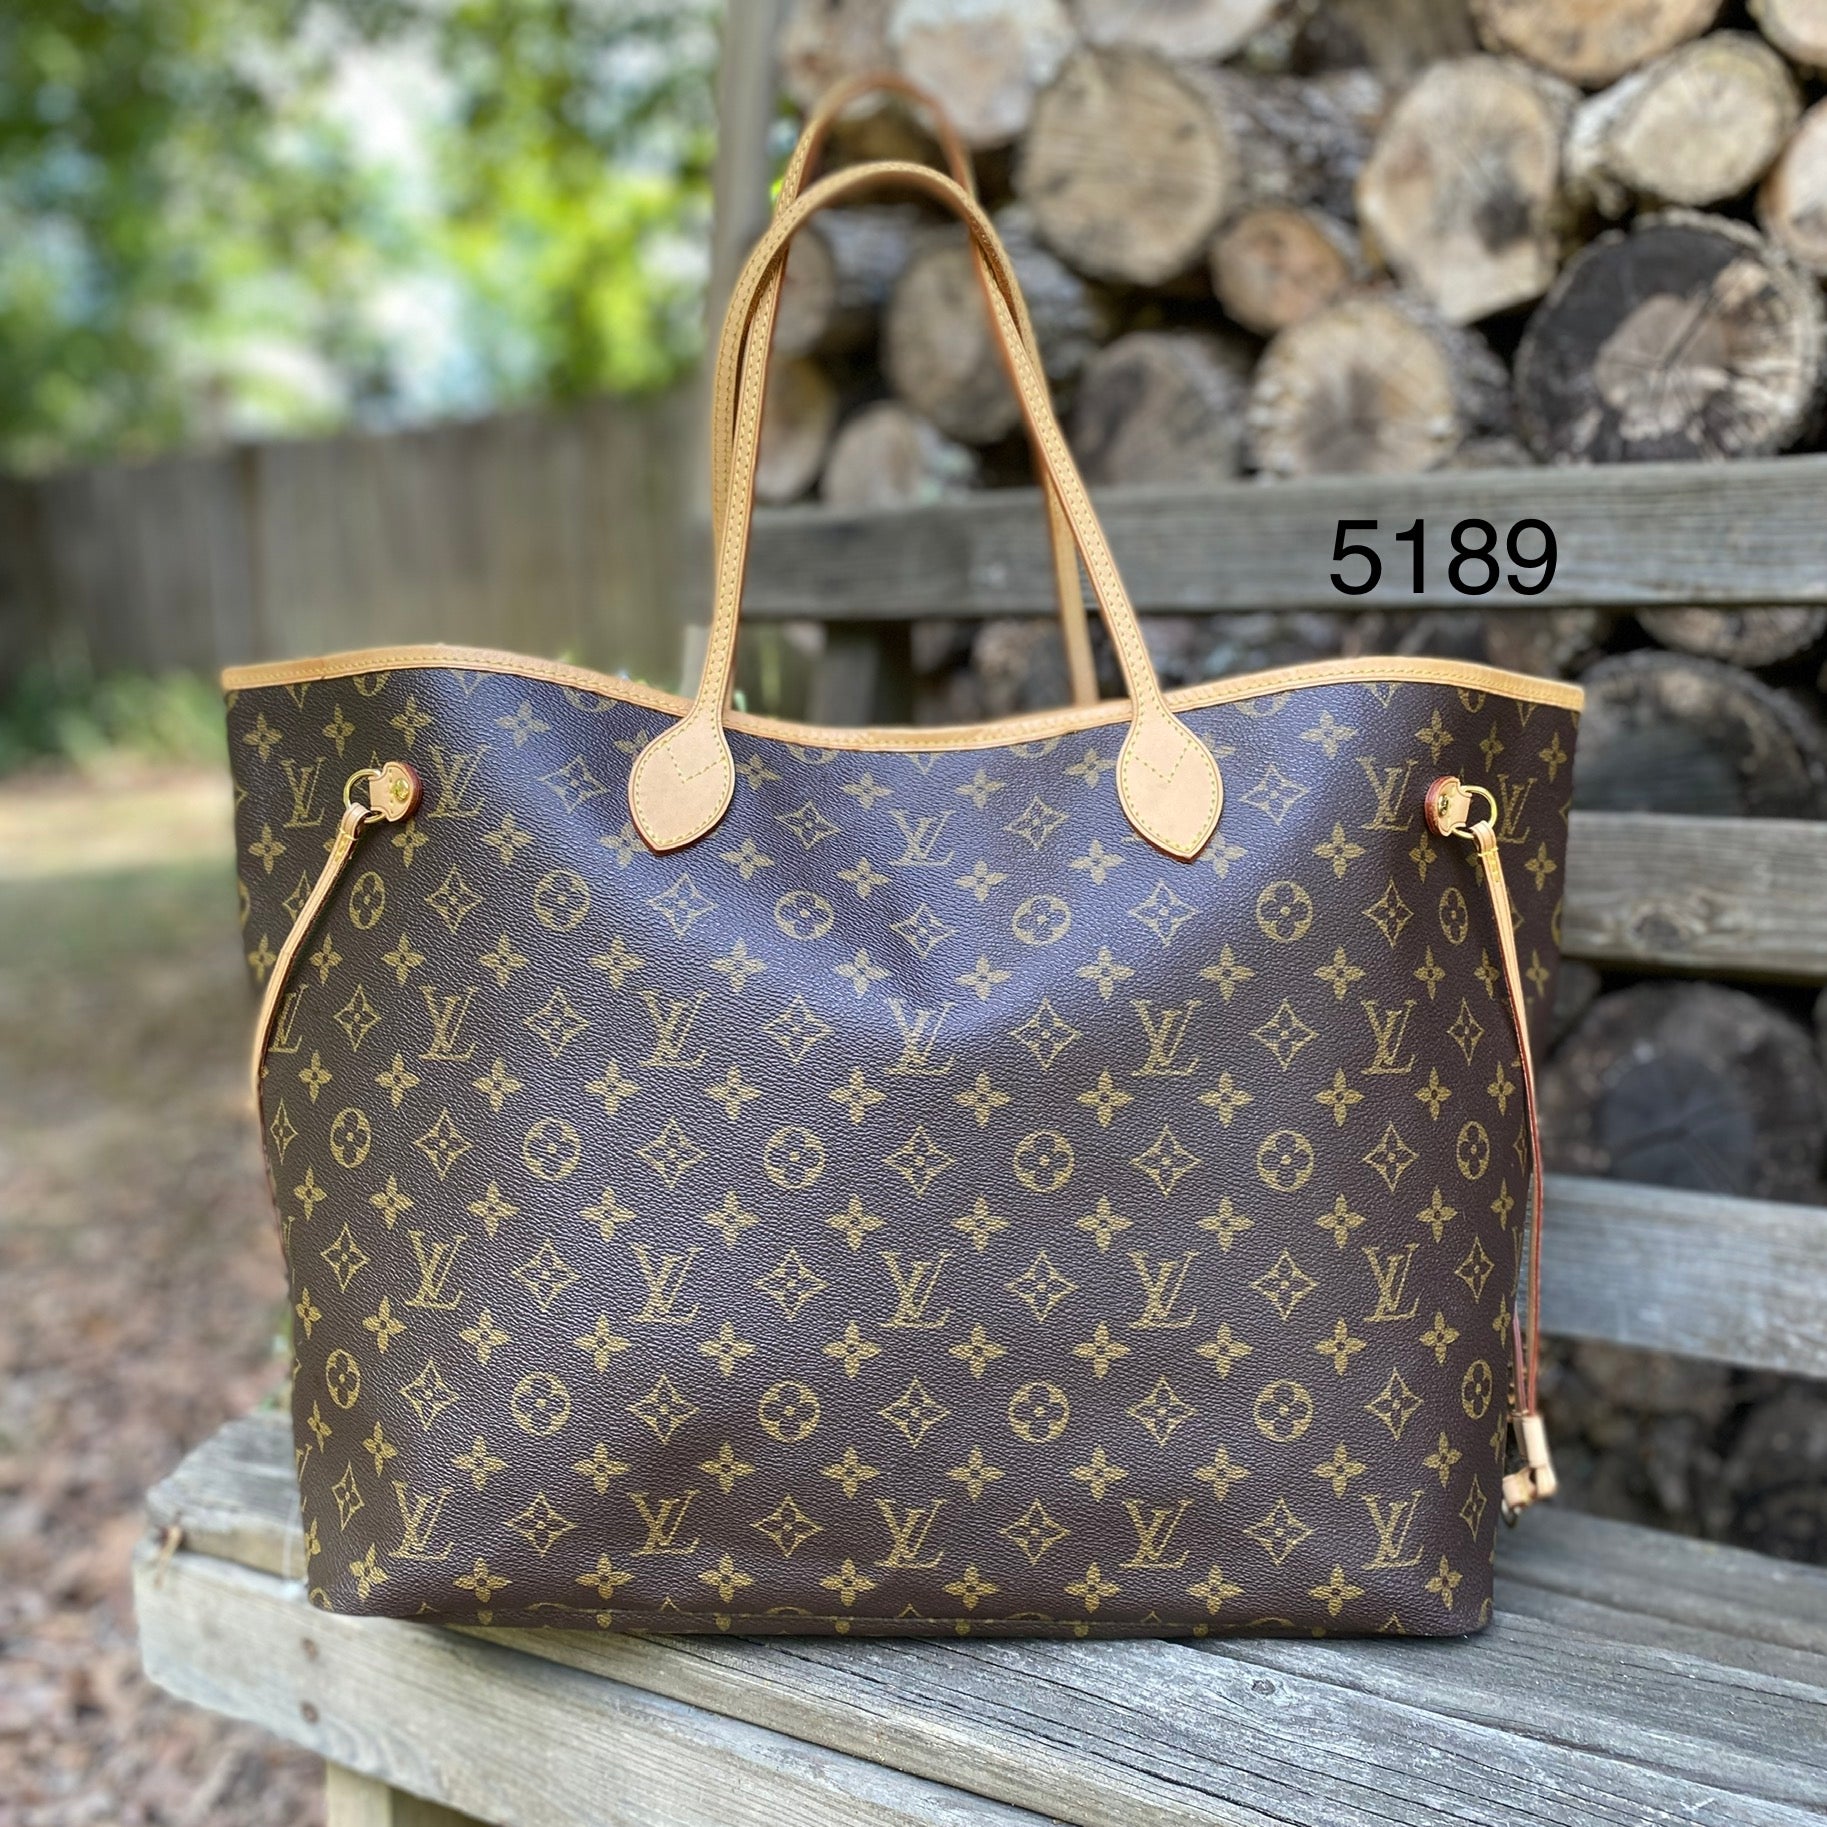 Authentic LV Neverfull GM. Made in USA. Well Mentain and pet free